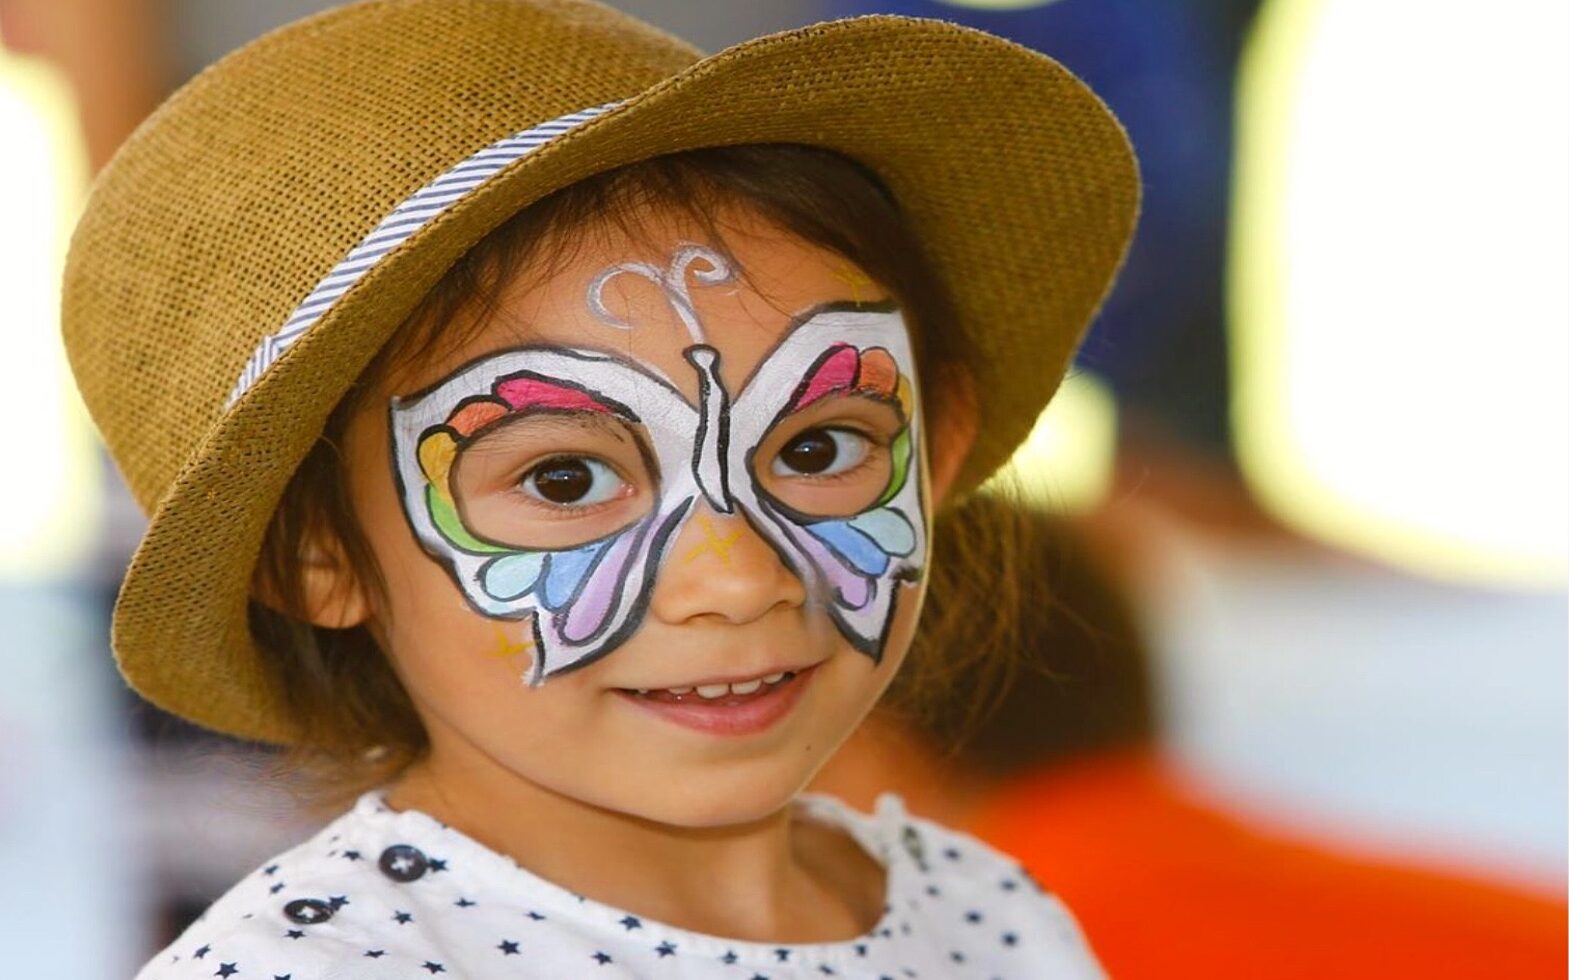 A girl has her face painted at the Vancouver International Children’s Festival